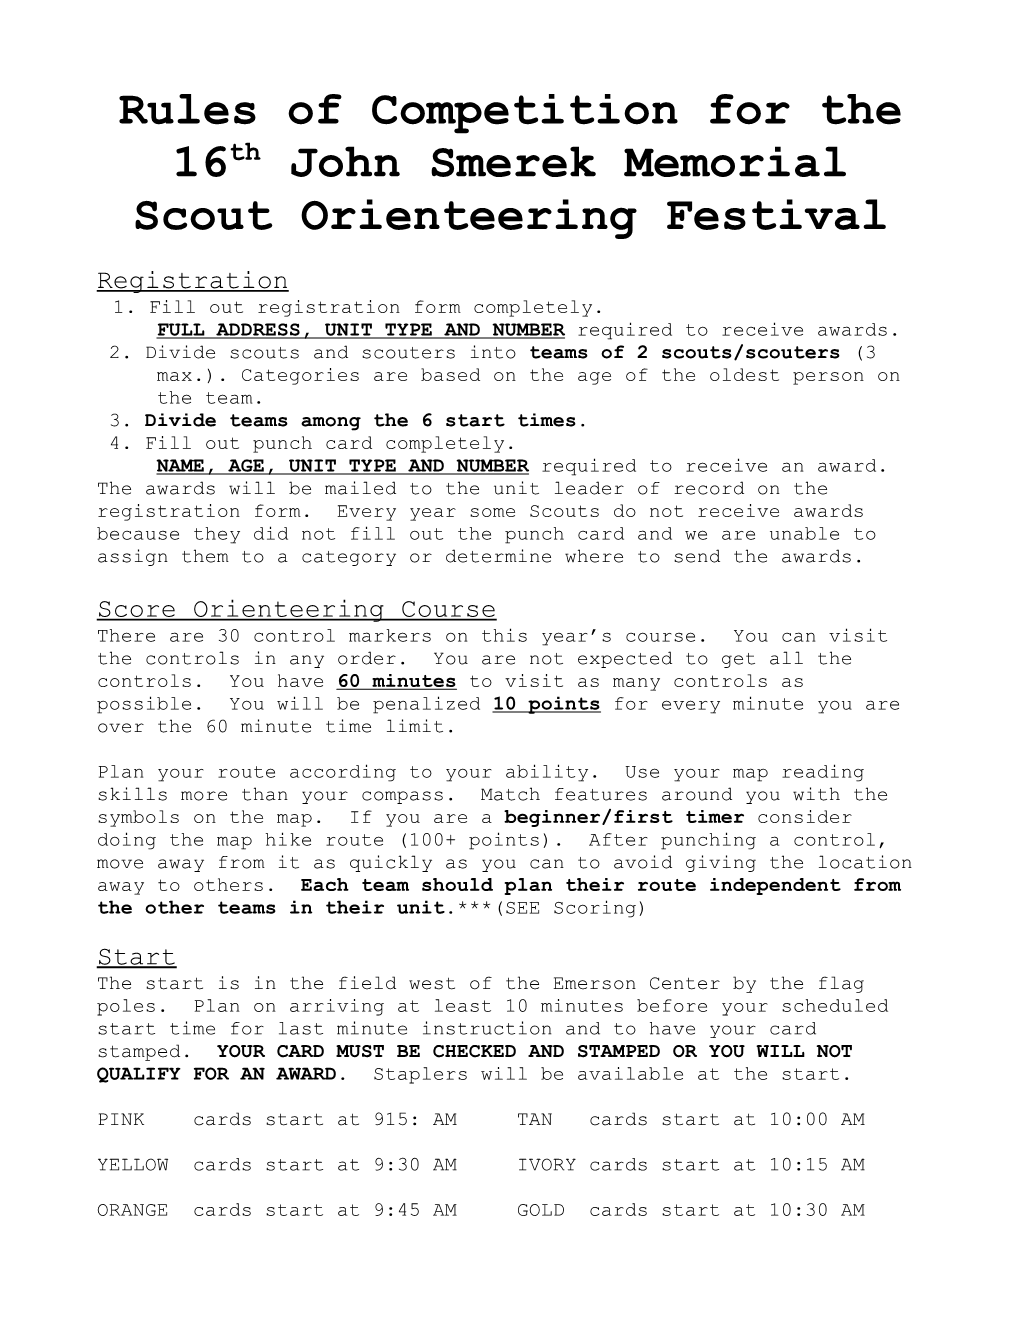 Welcome to the 7Th John Smerek Memorial Scout Orienteering Festival